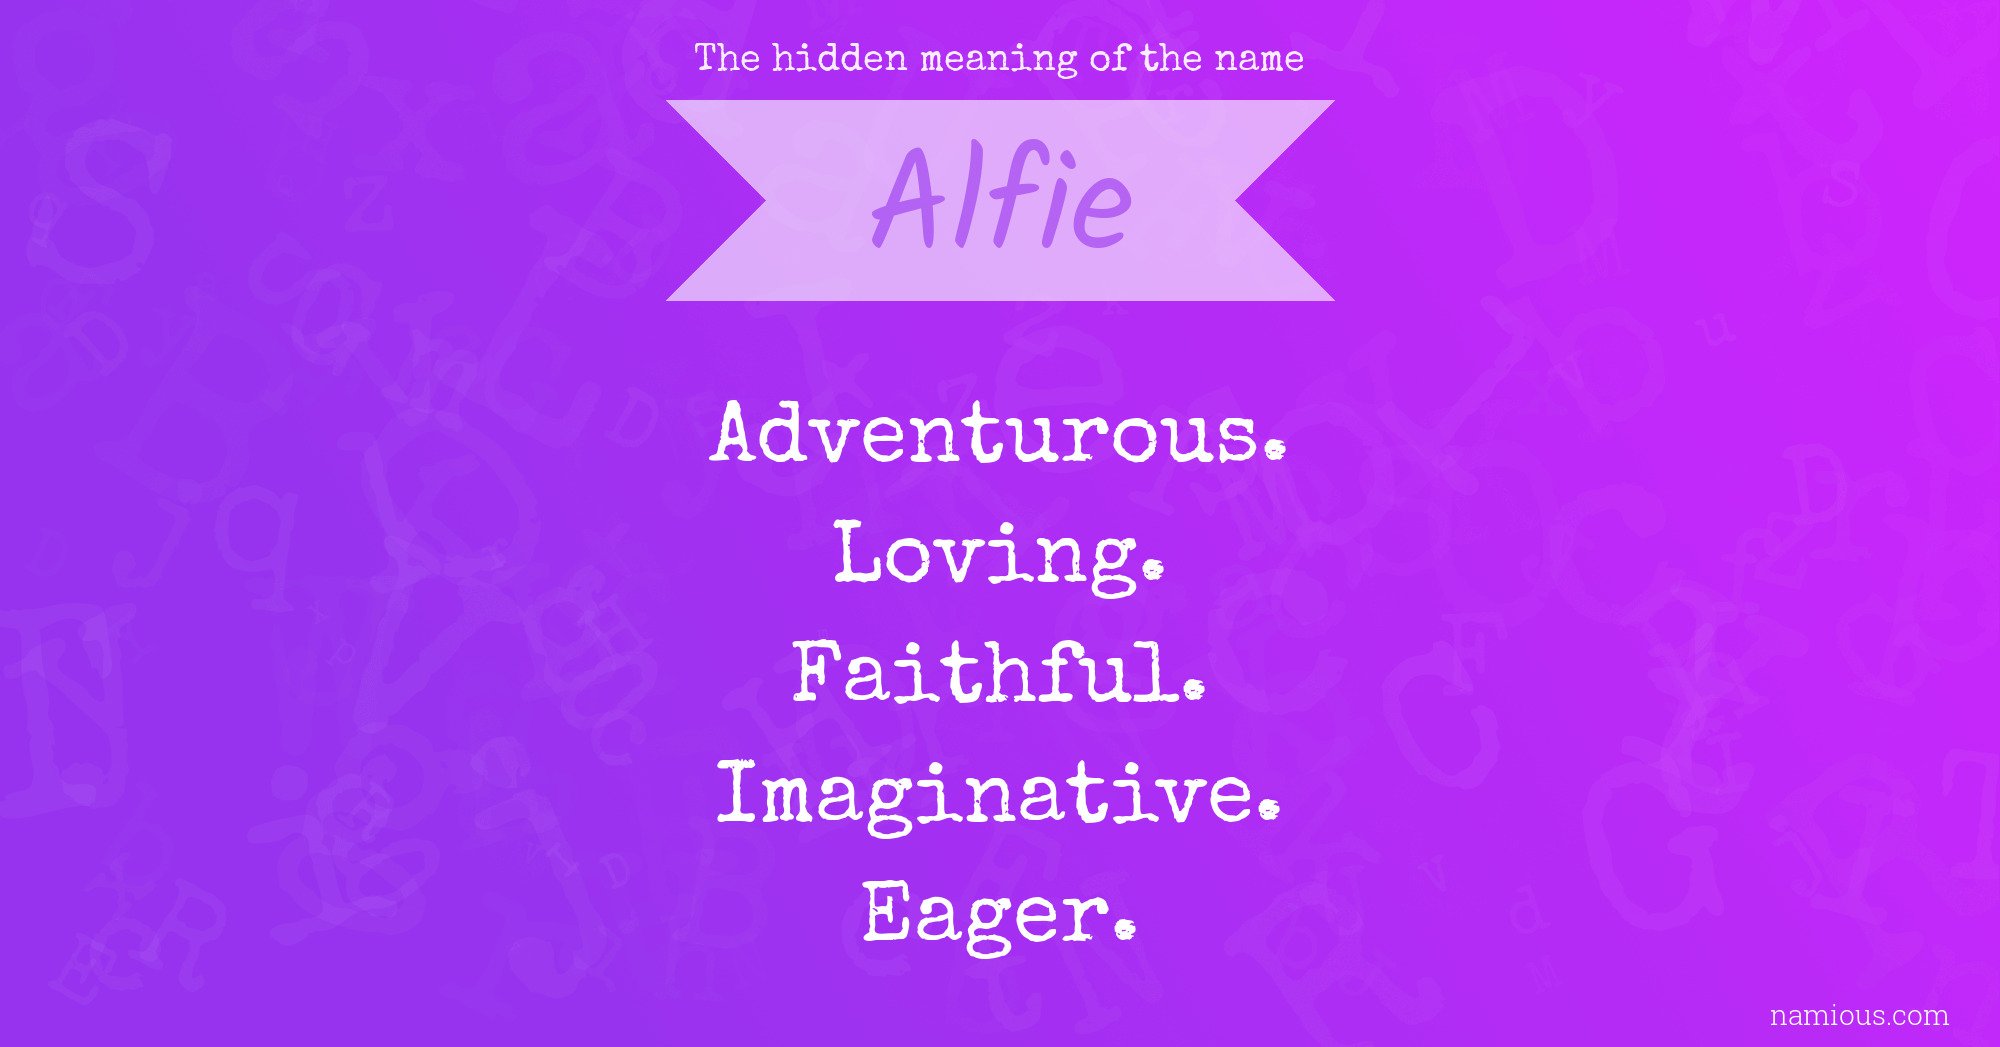 The hidden meaning of the name Alfie